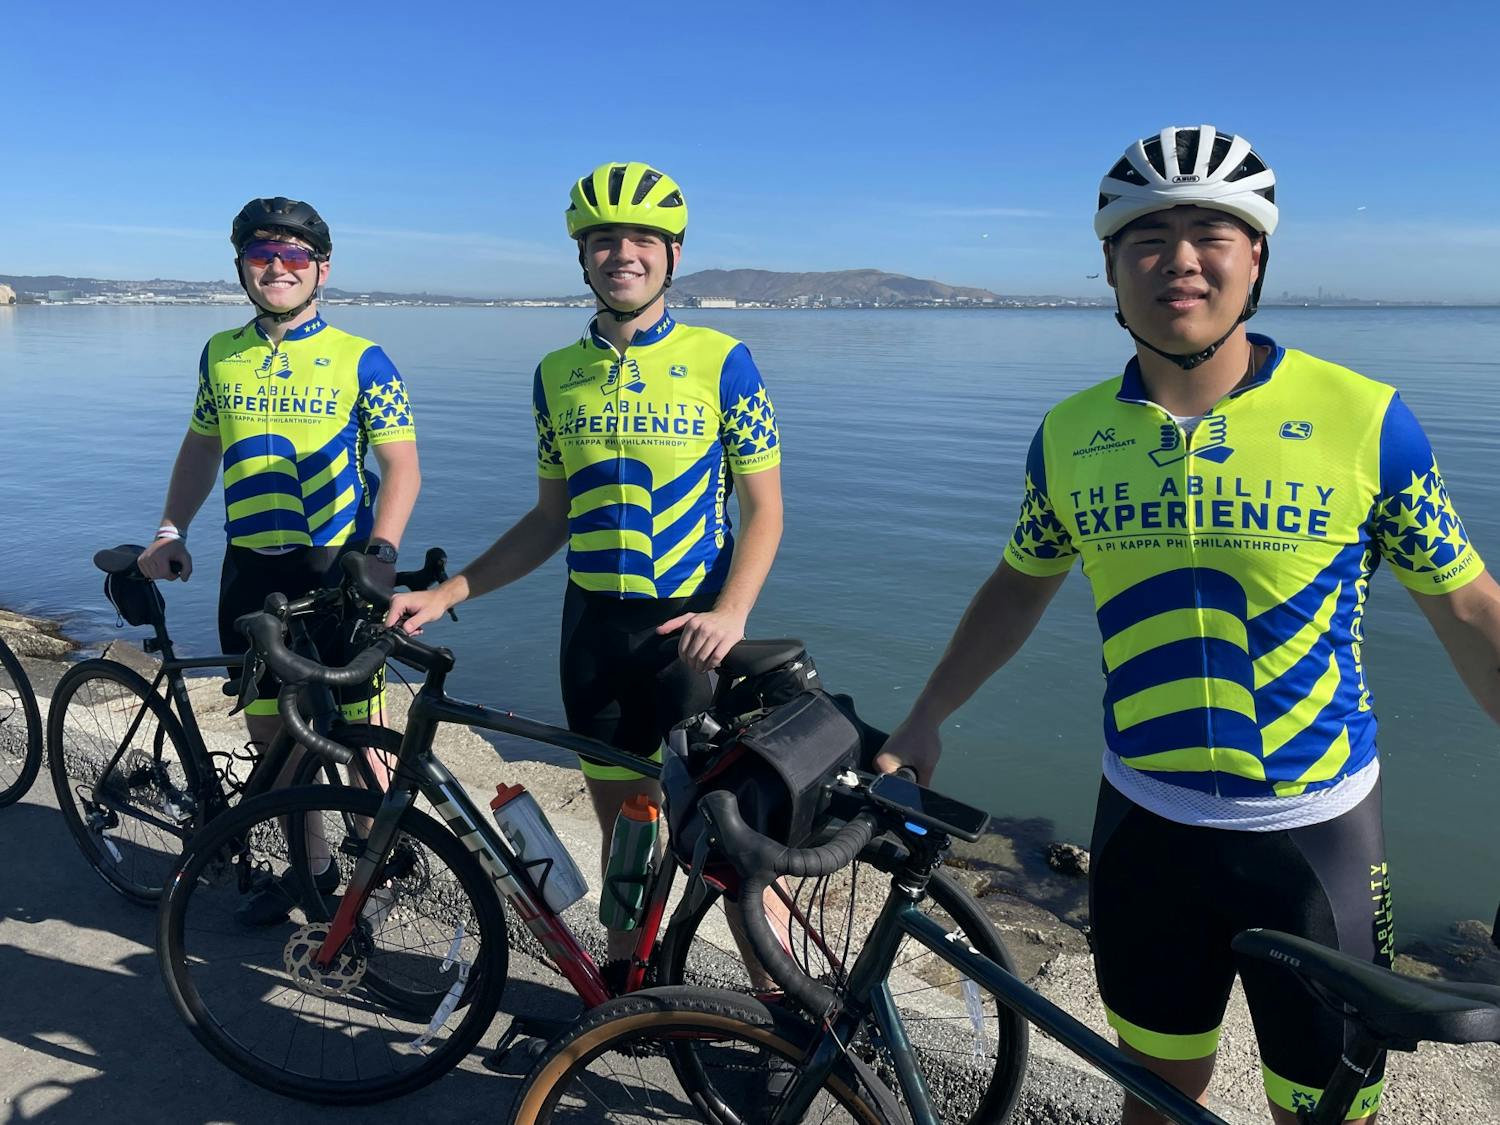 Three UNC students— (pictured from left to right) Cole Bright, Robert (Bo) Bell, and Ethan Mou— are cycling from California to Washington, DC this summer with the Ability Experience, a Pi Kappa Phi philanthropy. The trip, known as the Journey of Hope, is raising both funds and awareness for individuals with disabilities.&nbsp;